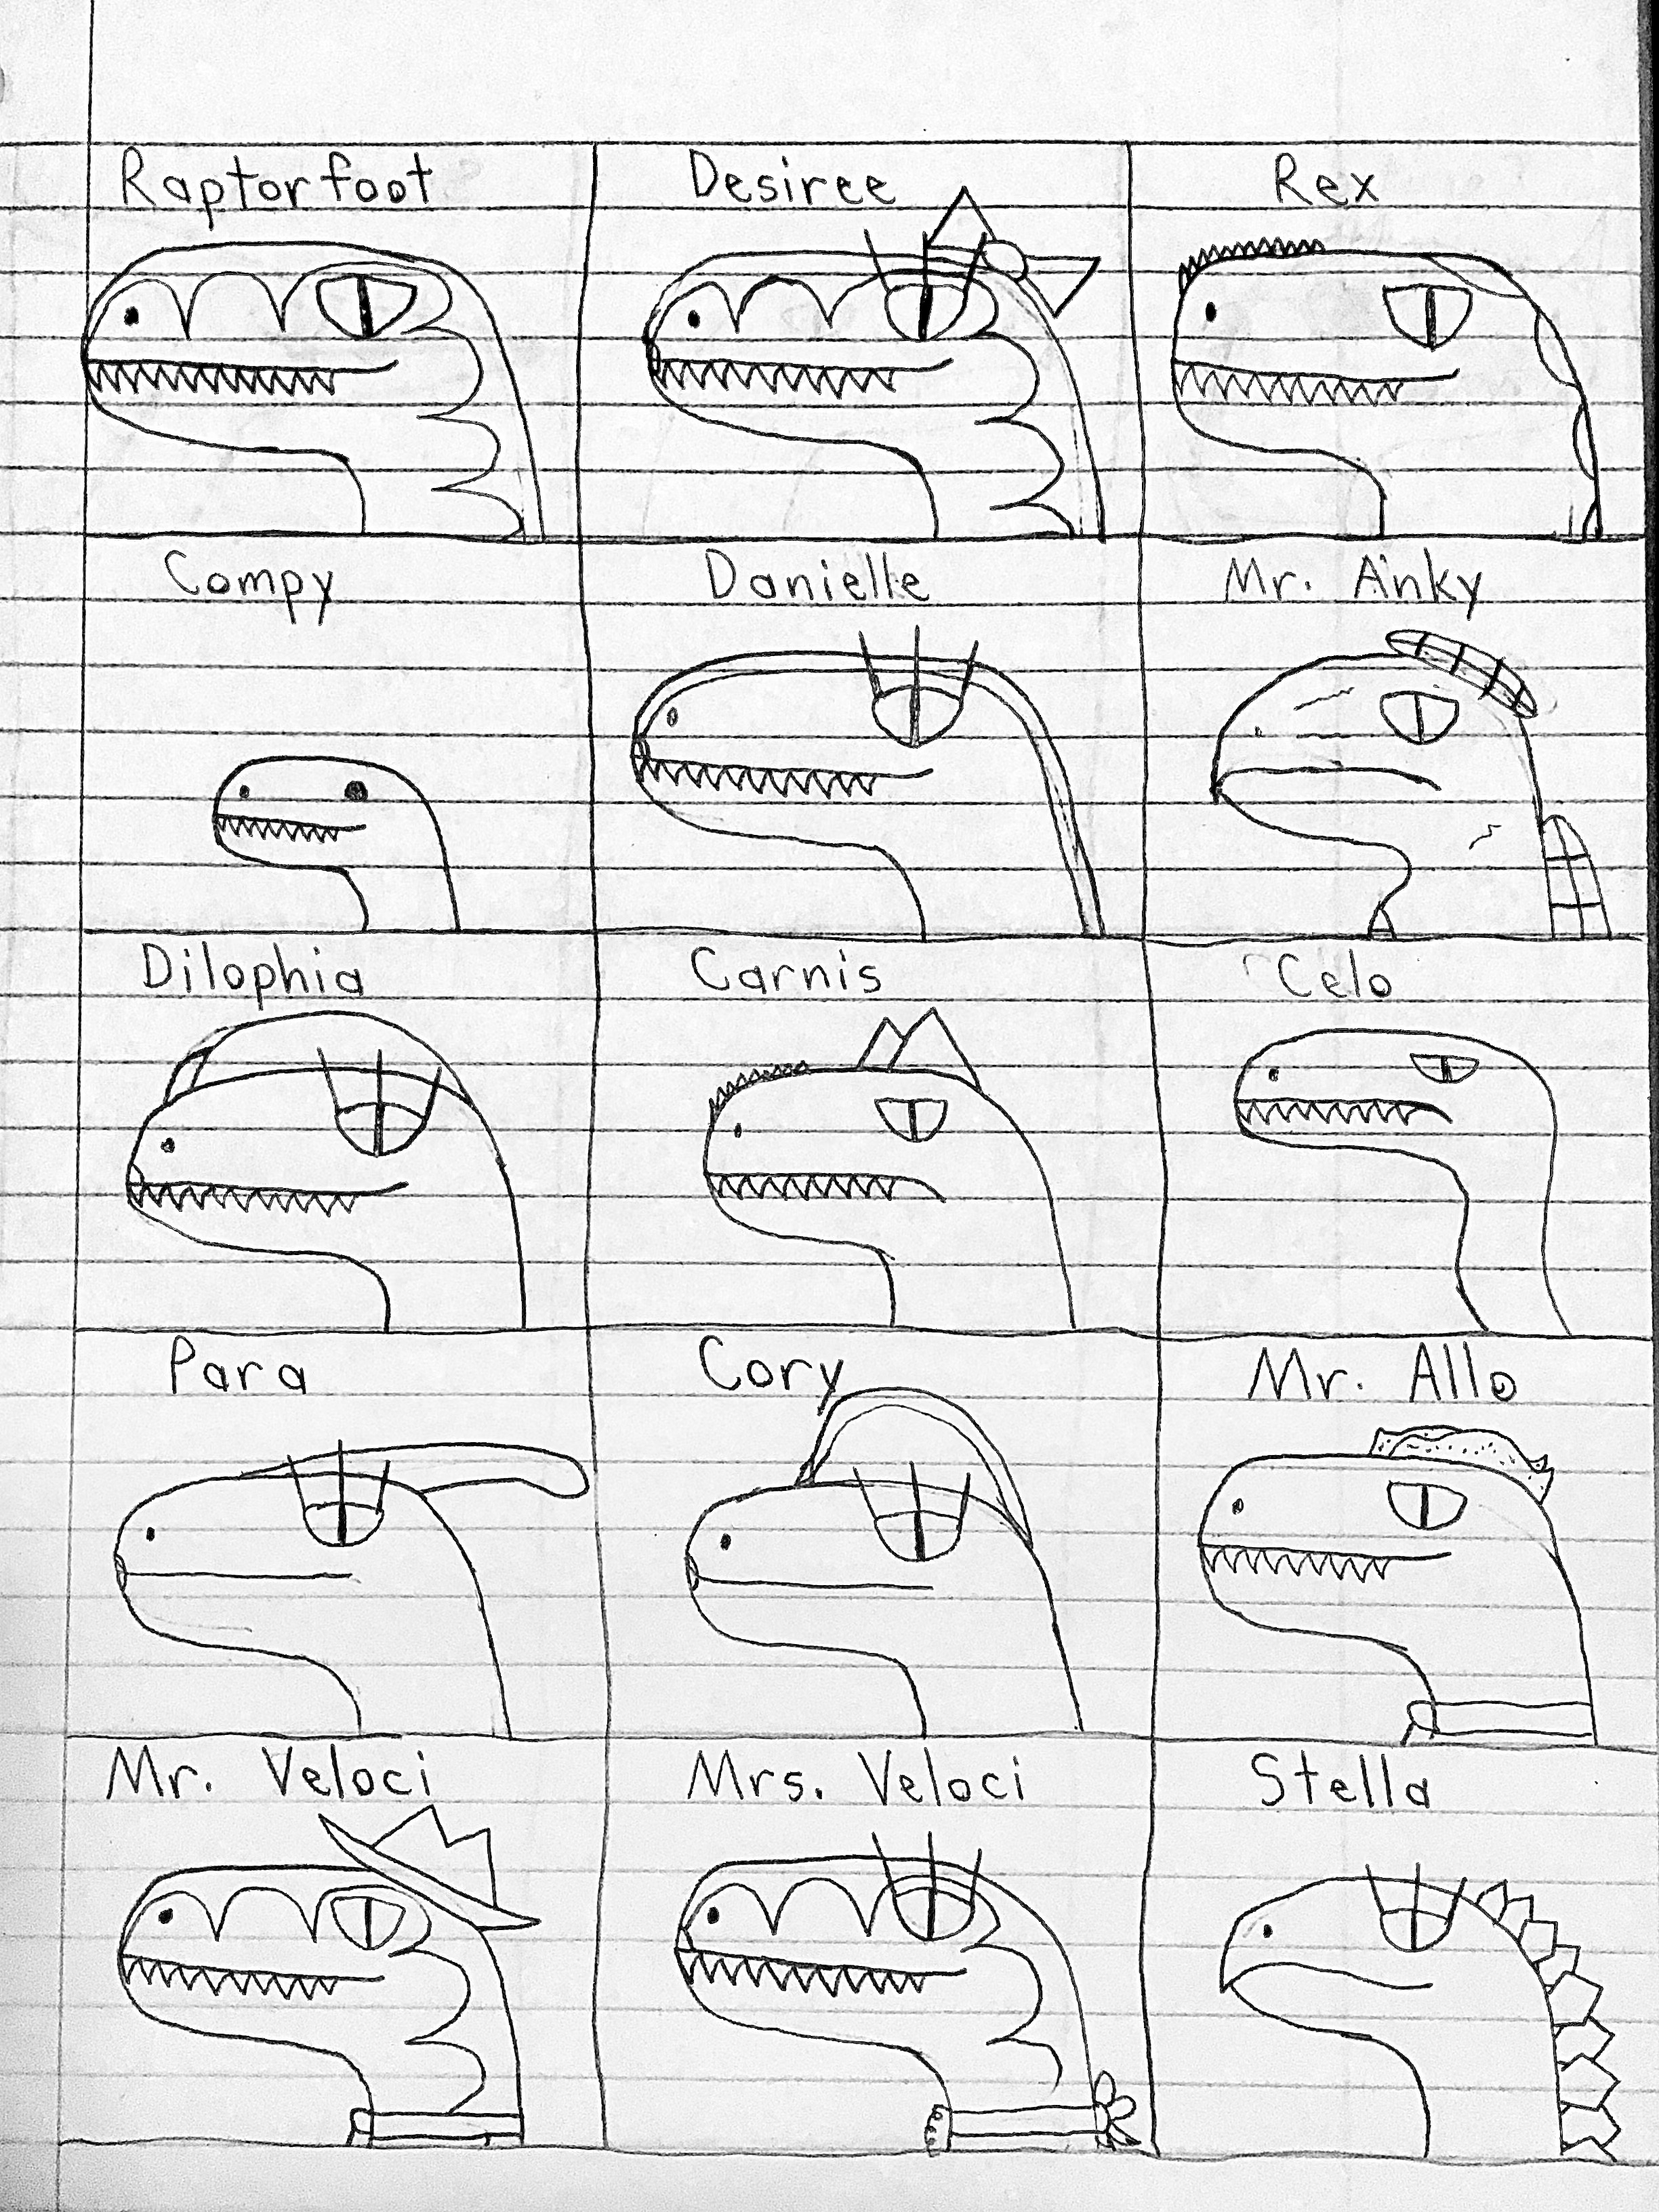 Raptorfoot Characters (Old)